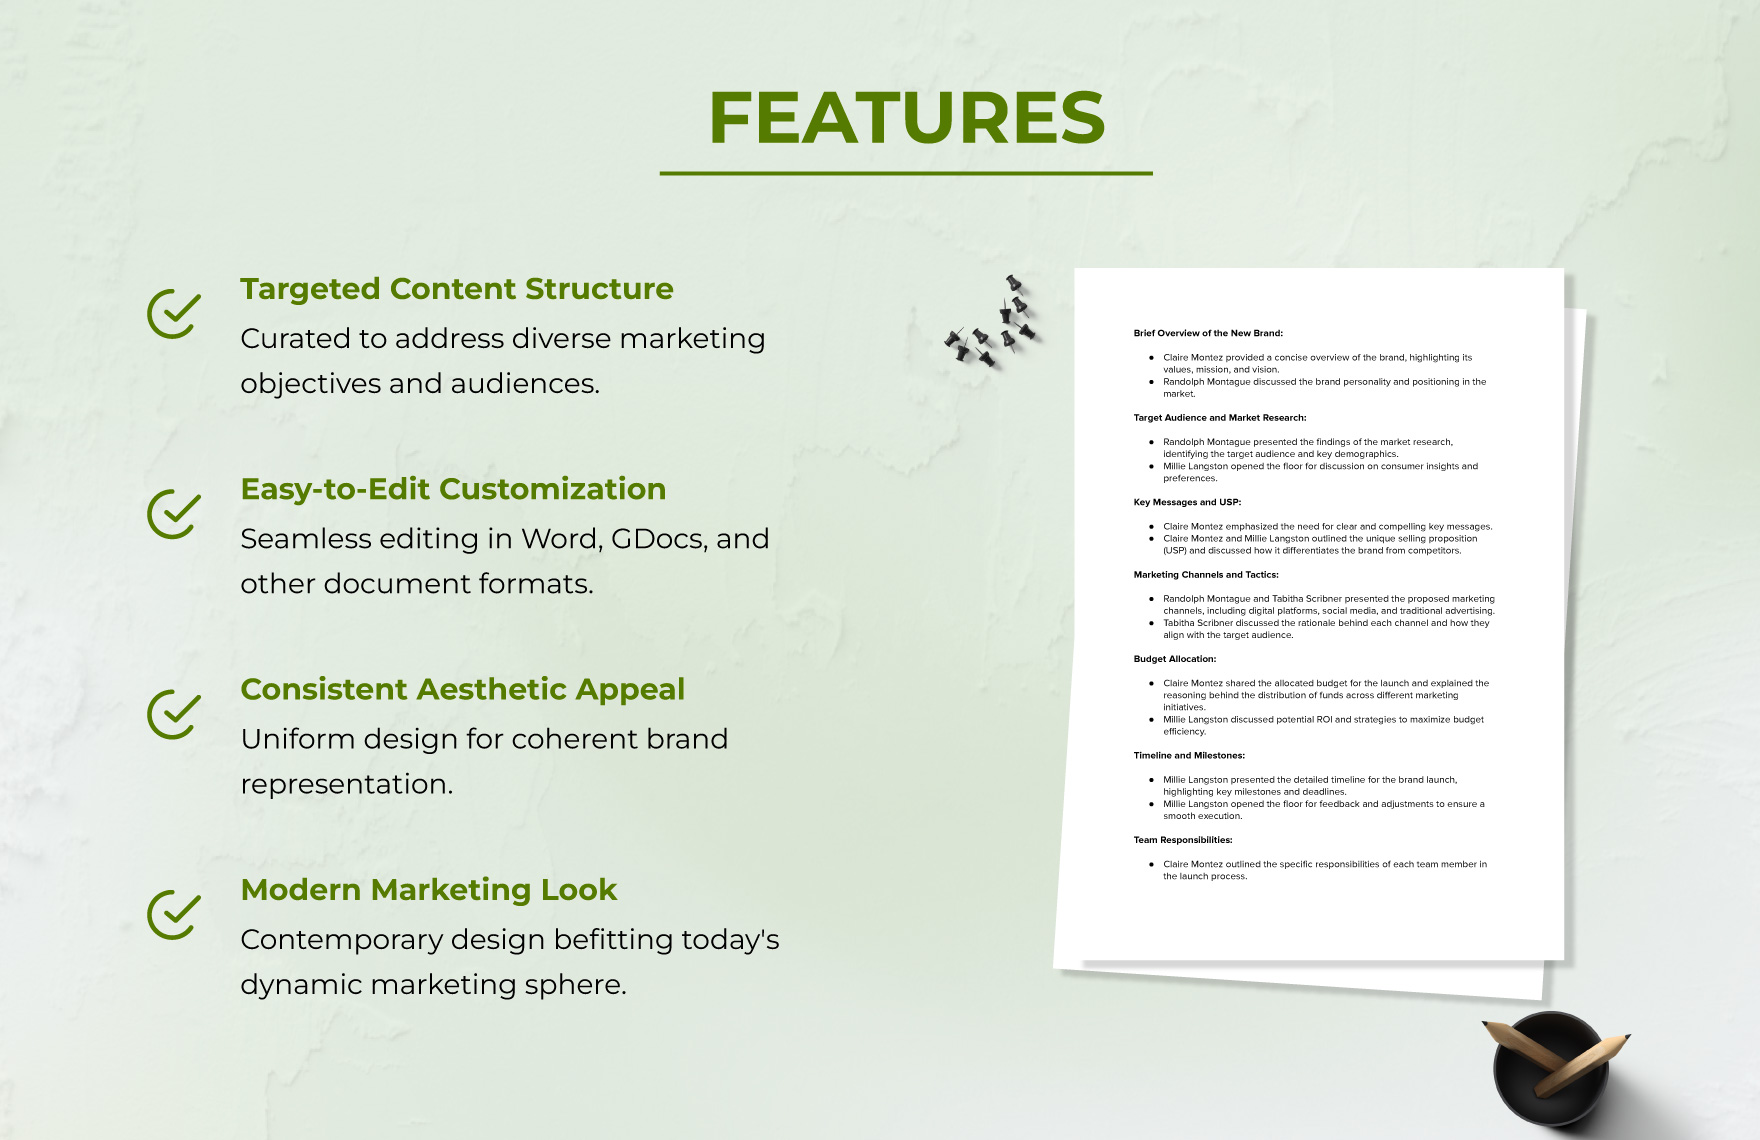 Marketing Brand Launch Minute Template